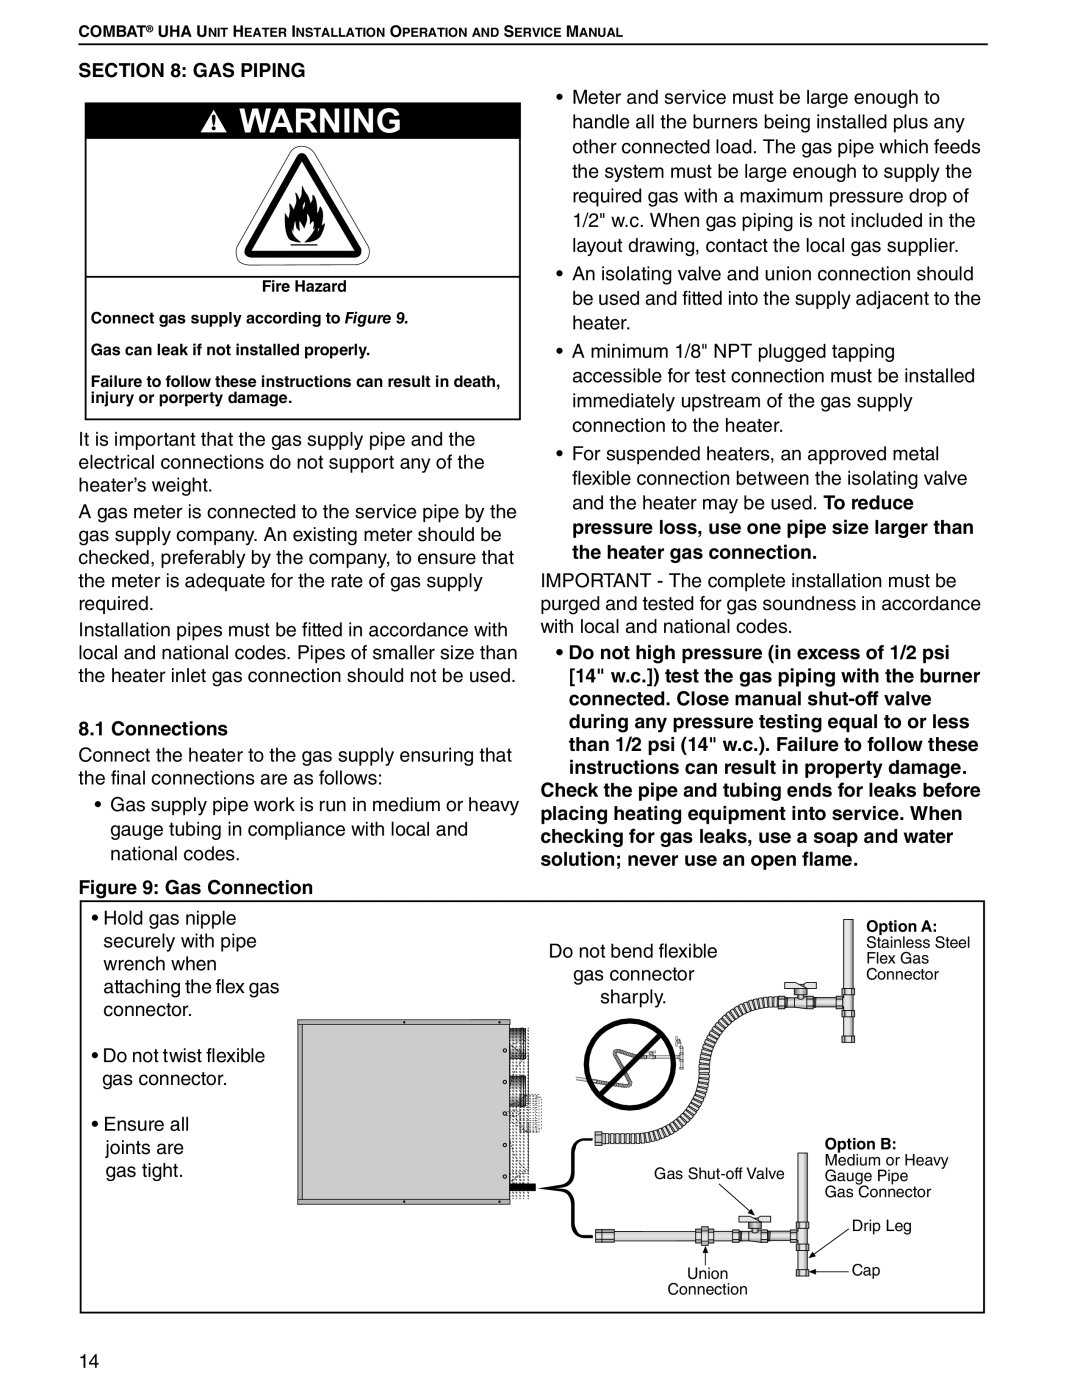 Roberts Gorden 250, 200, 350, 150, 400, 300, 225, 175 service manual Gas Piping, Connections, Gas Connection 